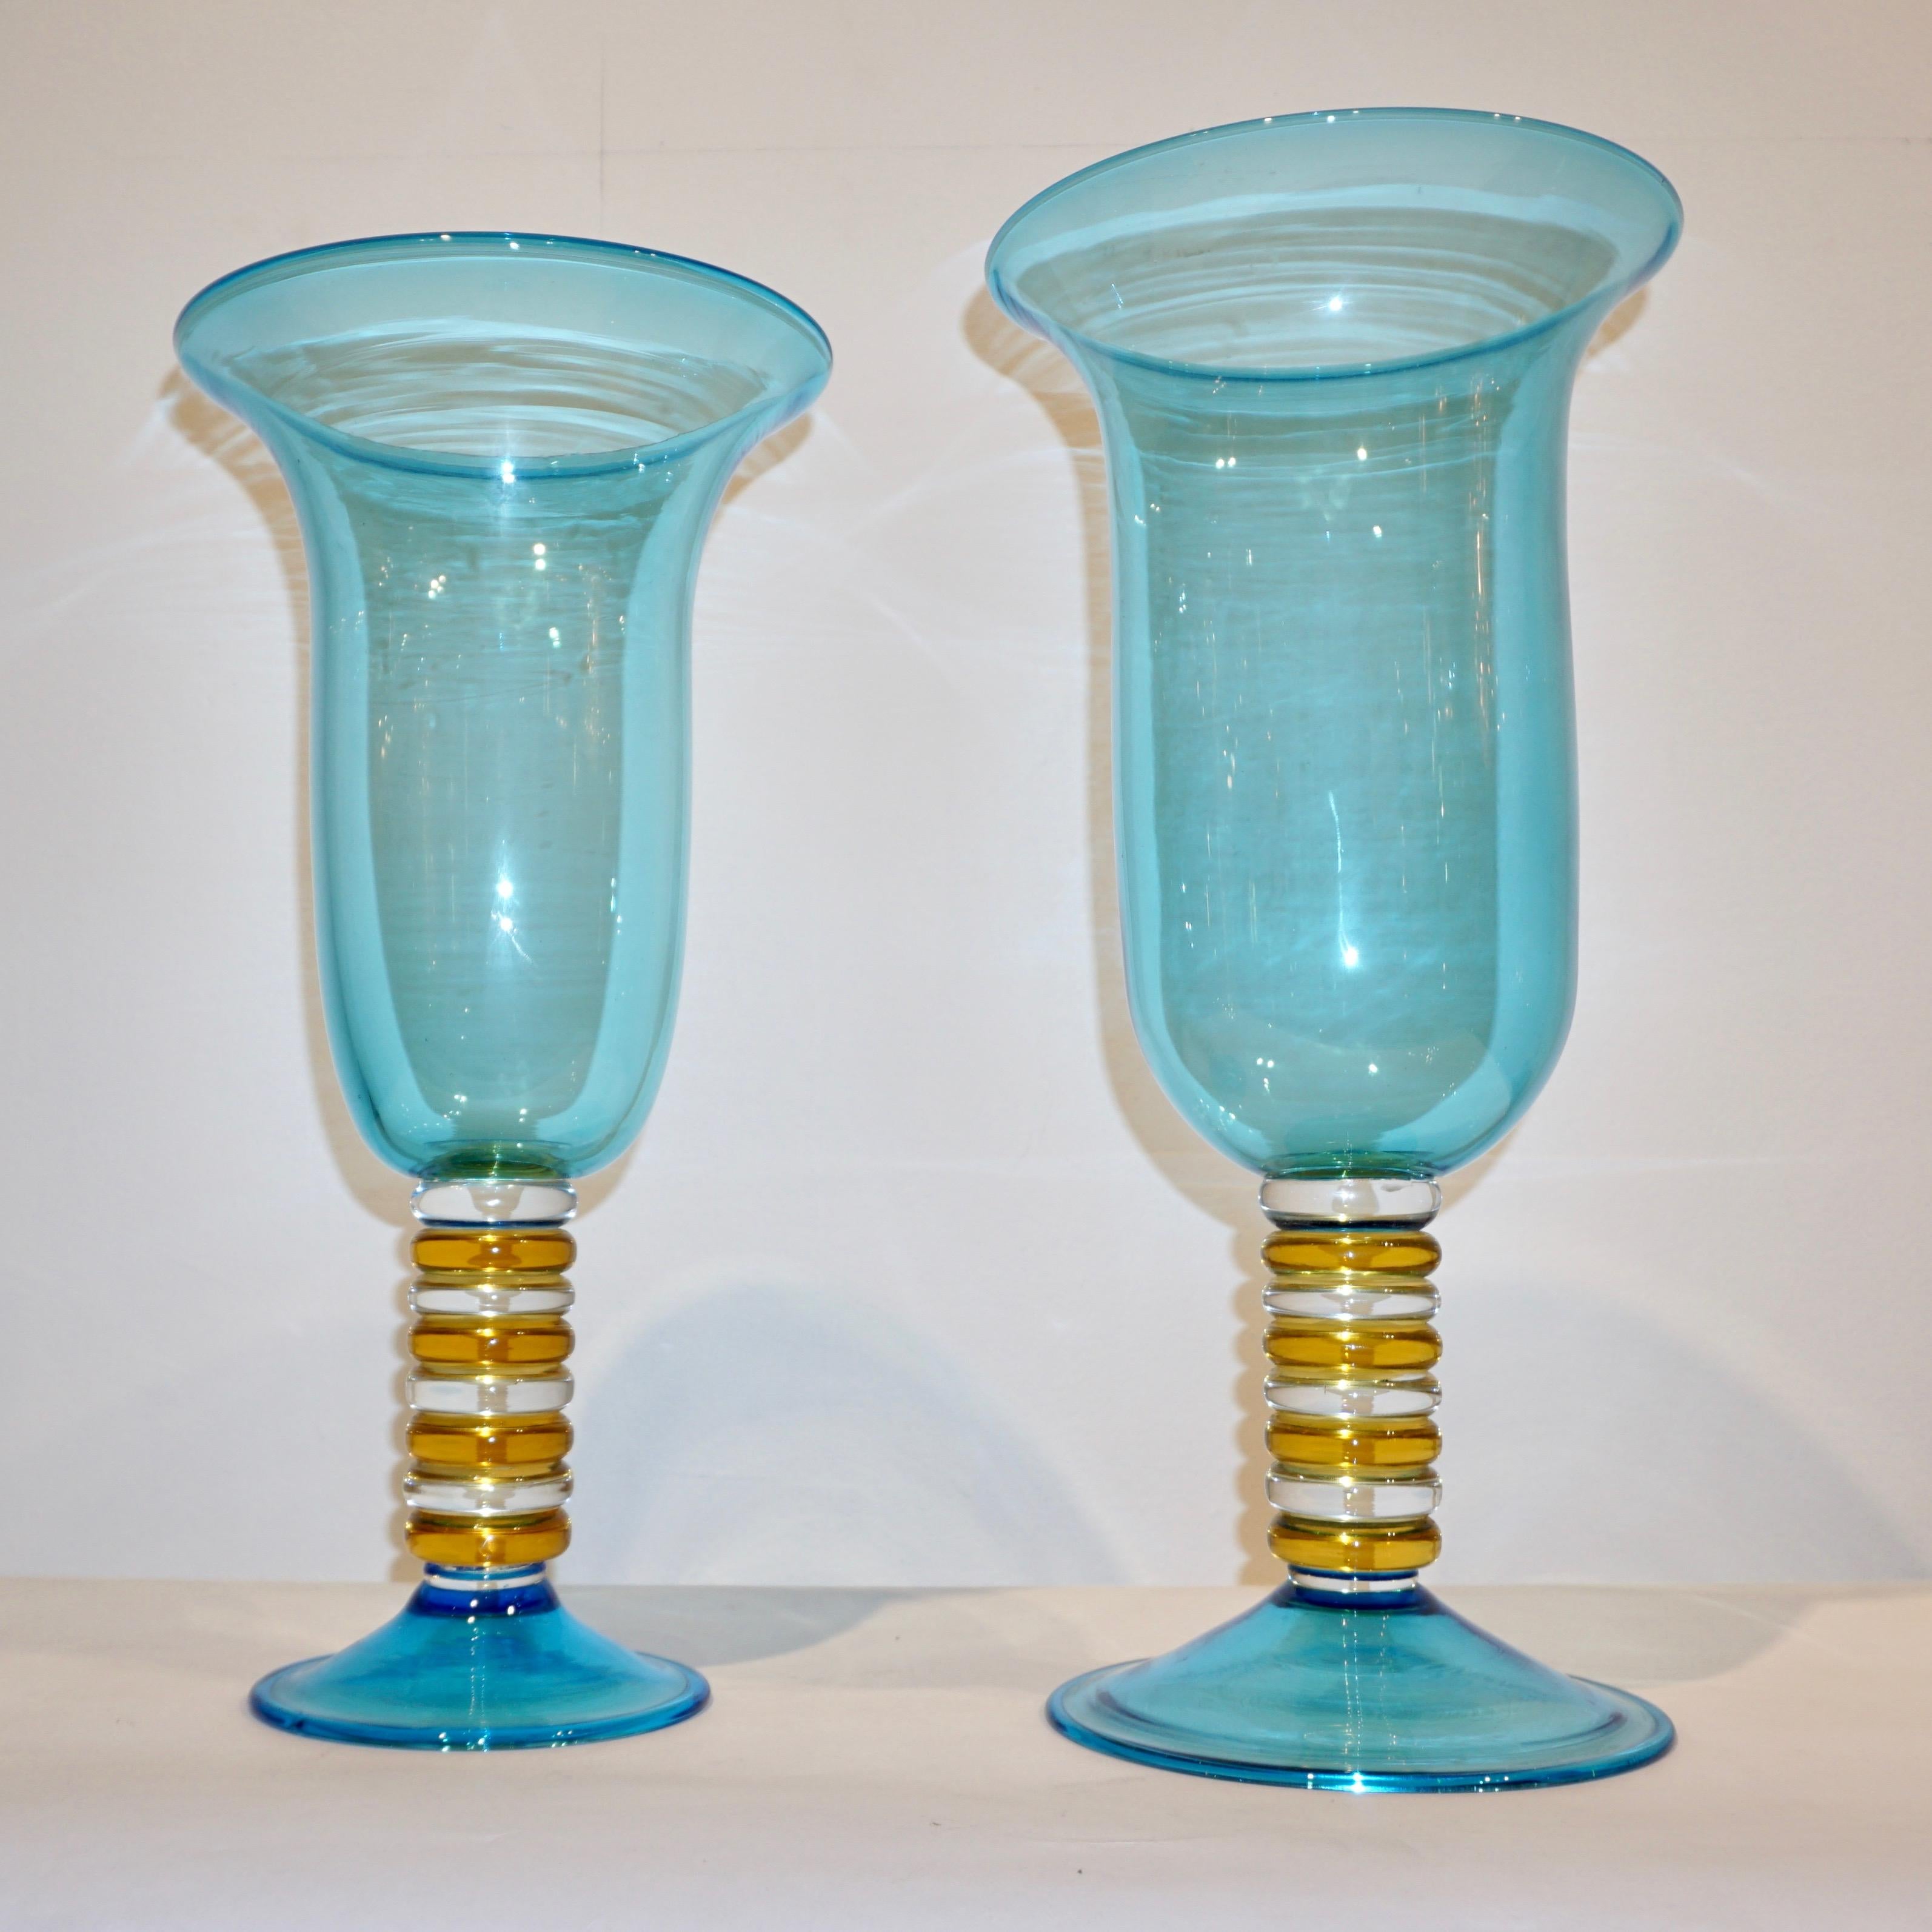 One-of-a-kind vintage mid-20th century blown Murano glass vases by Formia, superb turquoise blue color that shimmers because of the high quality craftsmanship, intensifying at the borders and multiplying light reflections, presenting an organic